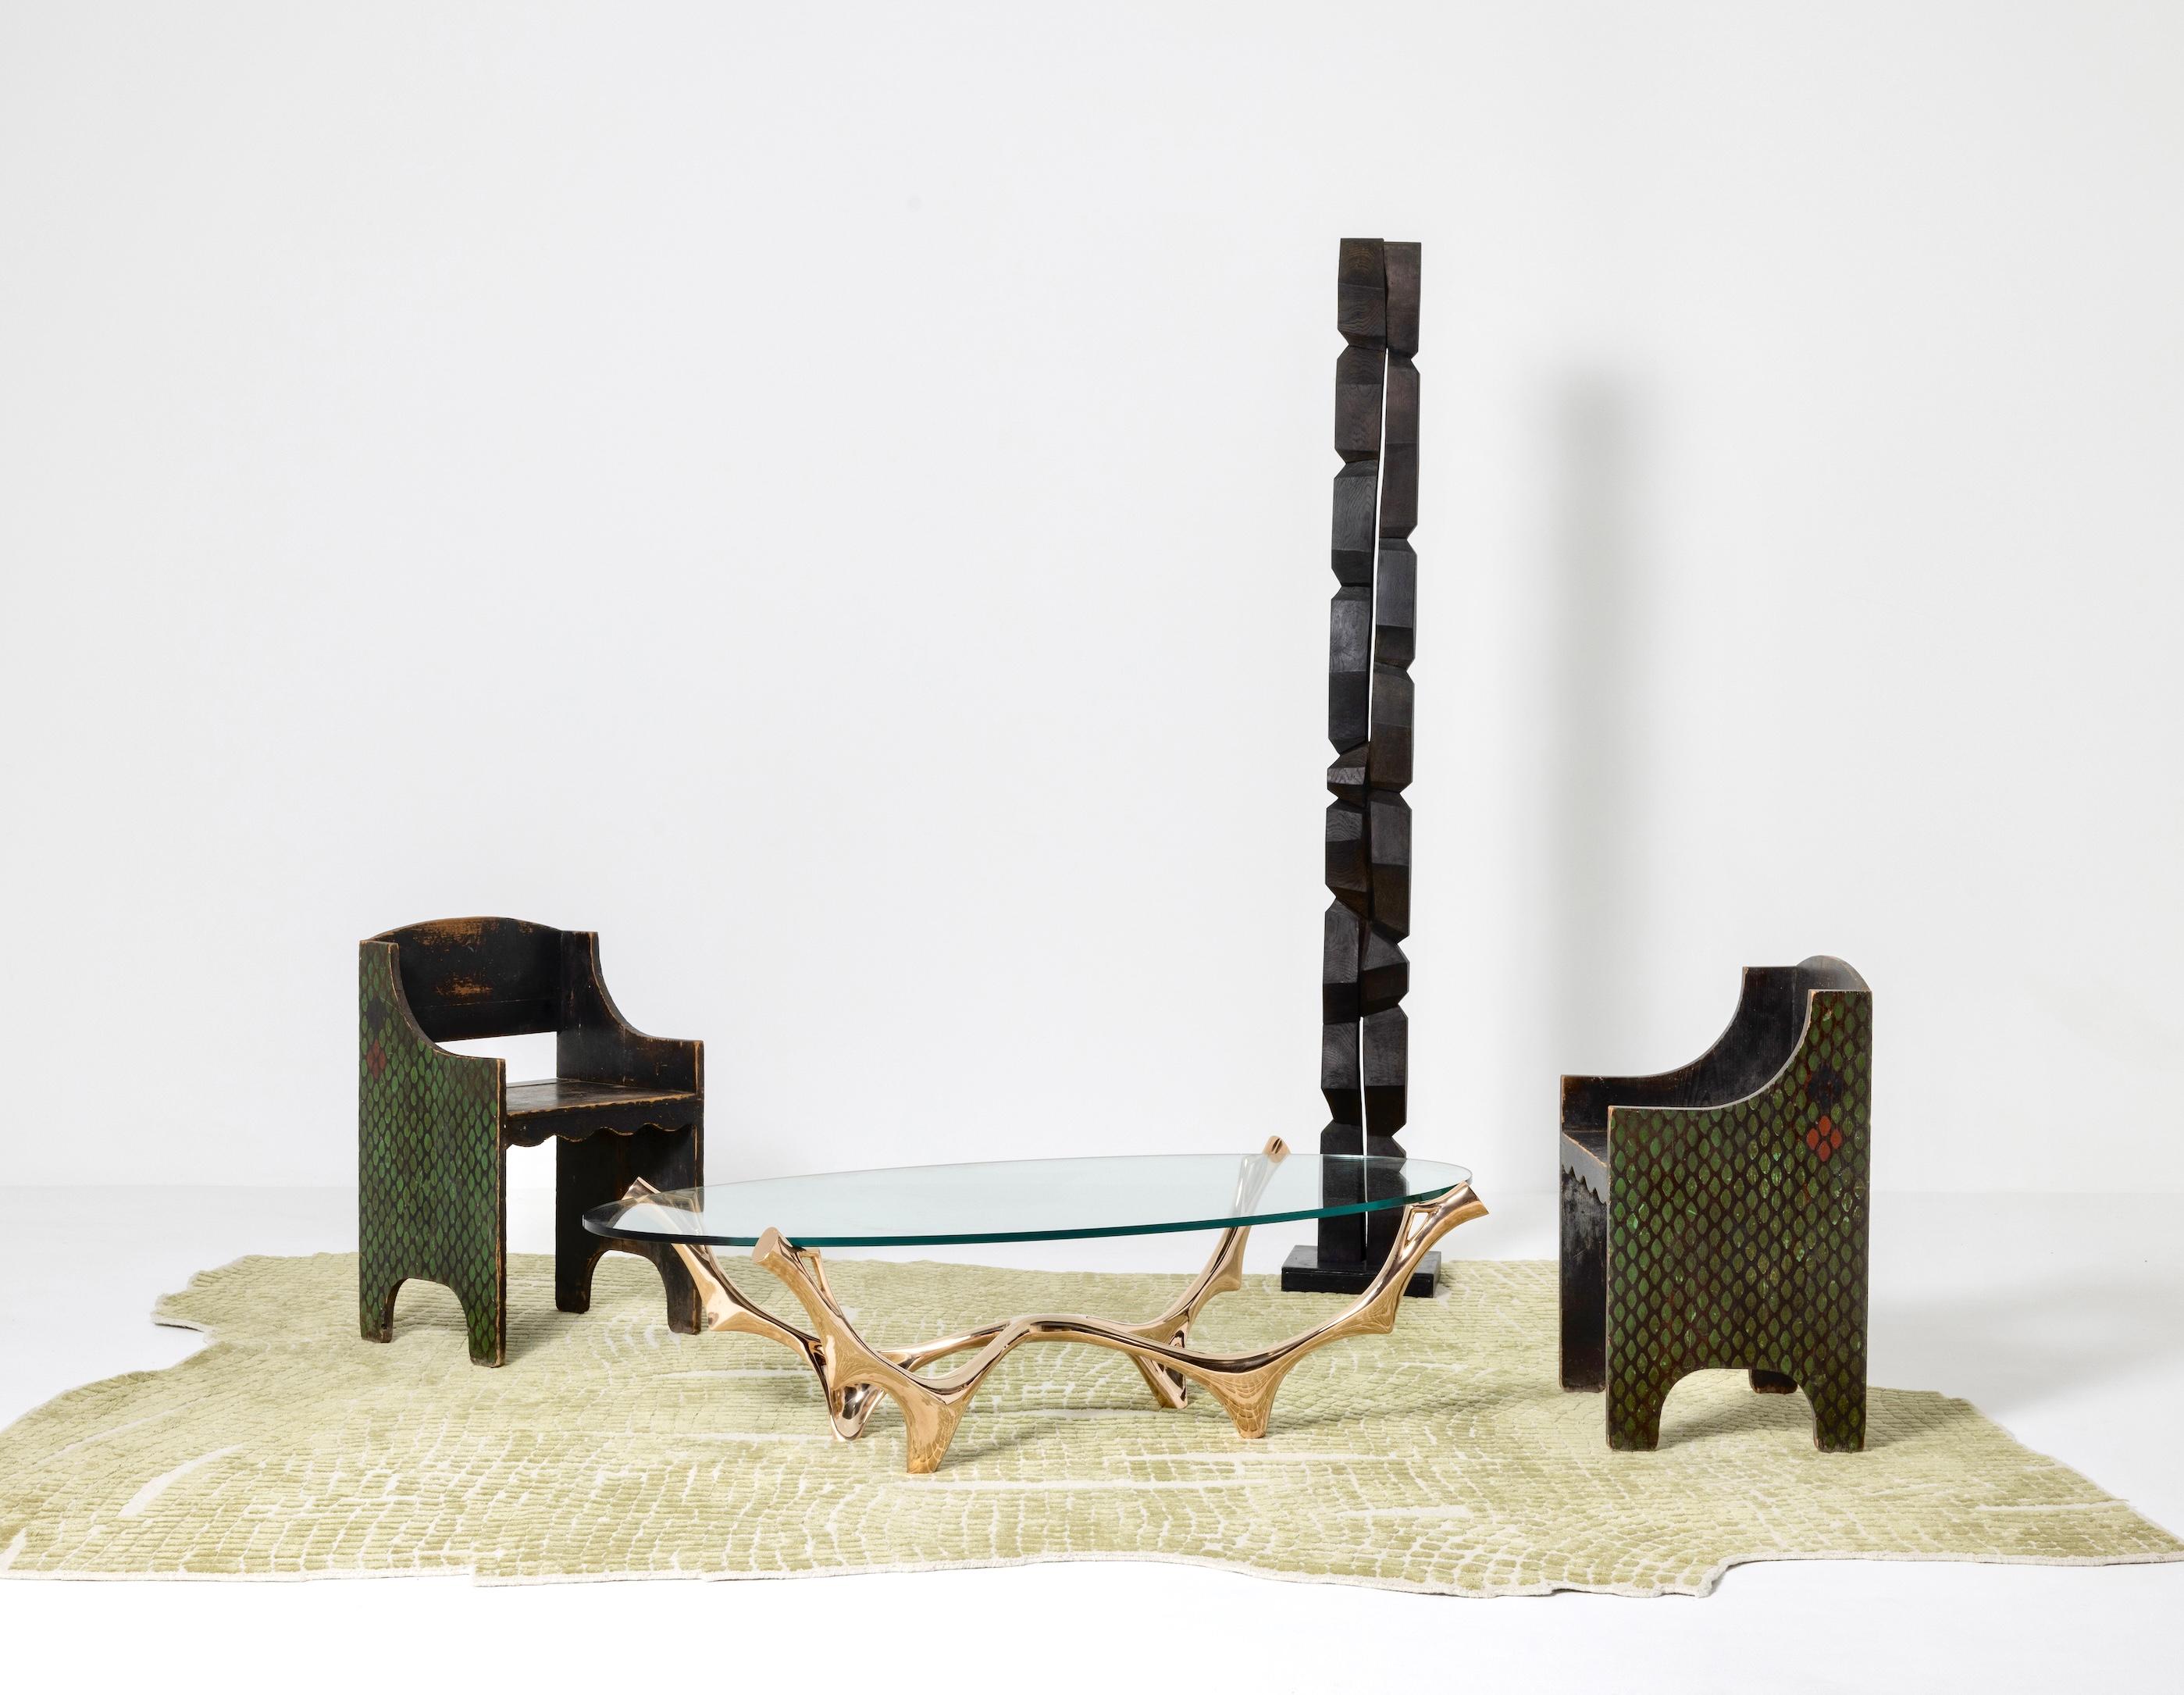 Pierre Salagnac, Elan coffee table
Material: High-polish bronze, glass top
Dimensions: L 152 x W 74 x H 40 cm
Year: 2022
Limited and numbered edition of 8 pieces + 4 AP, handmade in France.
- Bespoke dimensions and bronze patinas upon